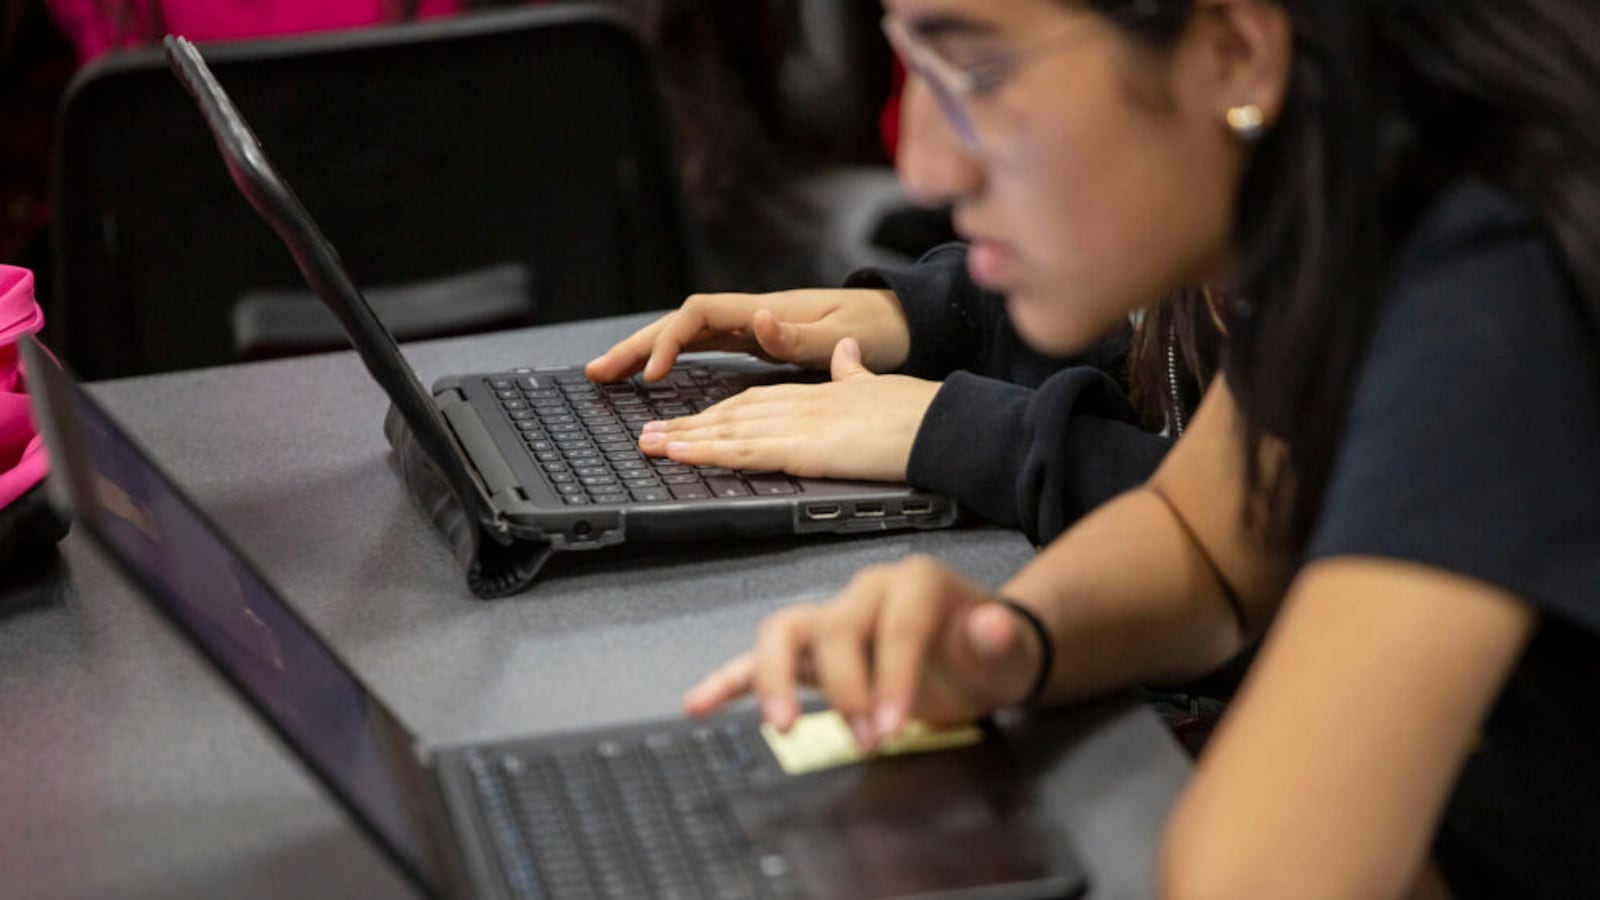 A high school student at DCIS Montbello leans toward a laptop on a table and looks intently into the screen. The hands of another student sitting to the right are seen on a laptop. The students were working on an assignment in class in May 2019.